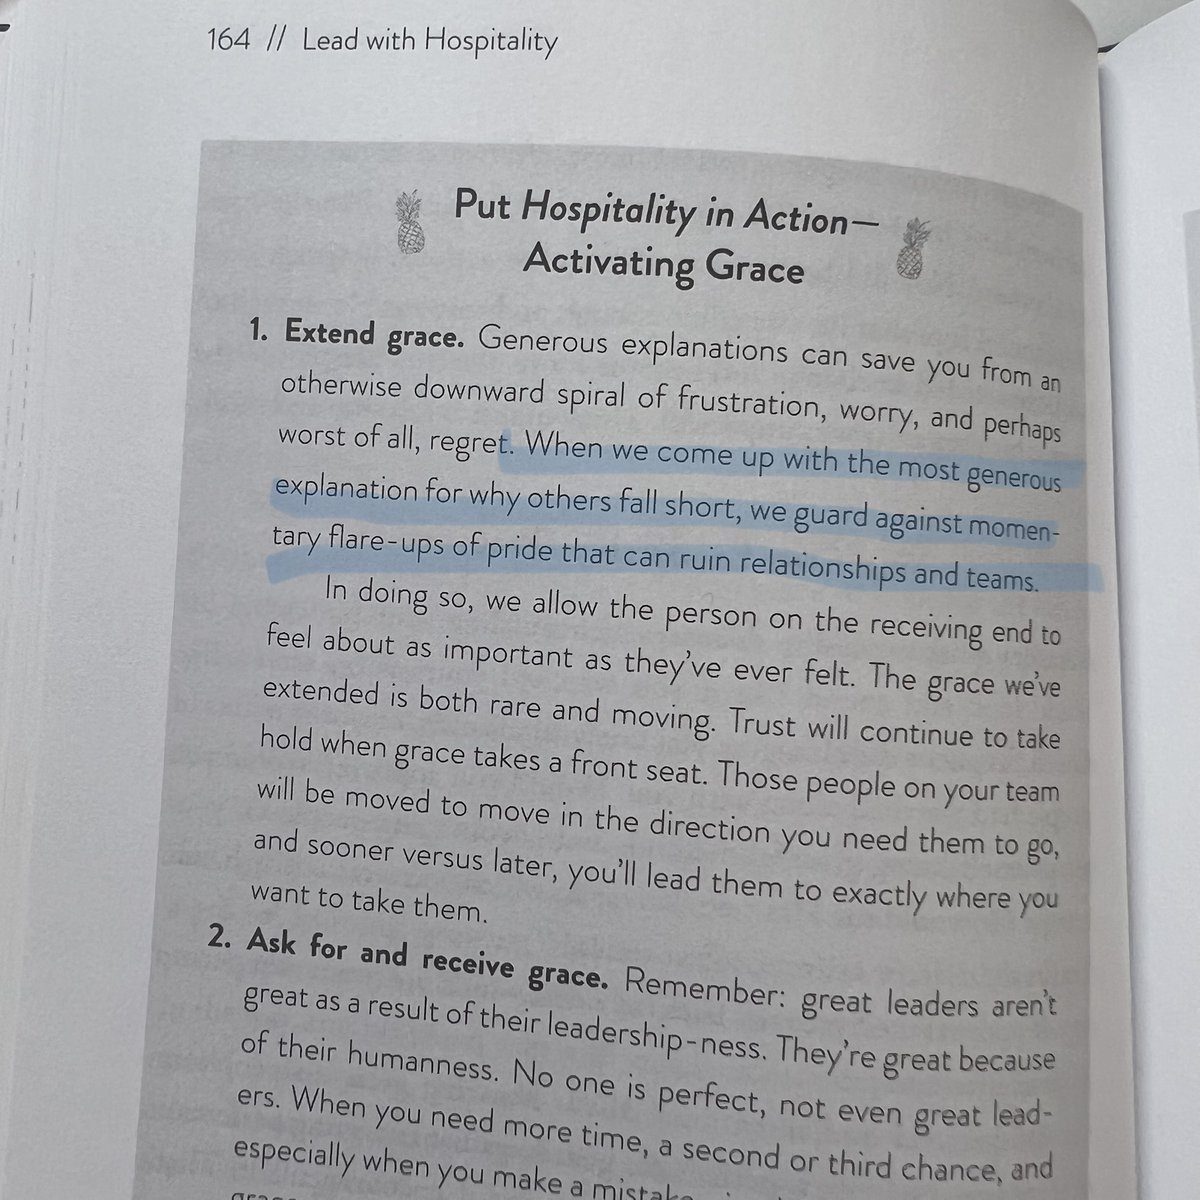 What do you assume when someone falls short of your expectations?

📷 'Lead with Hospitality' page 164

Get your copy of 'Lead with Hospitality' at your favorite bookstore! 

#HospitalityExcellence #LeadWithPassion #HospitalityBook #LeadershipJourney #EmployeeMotivation